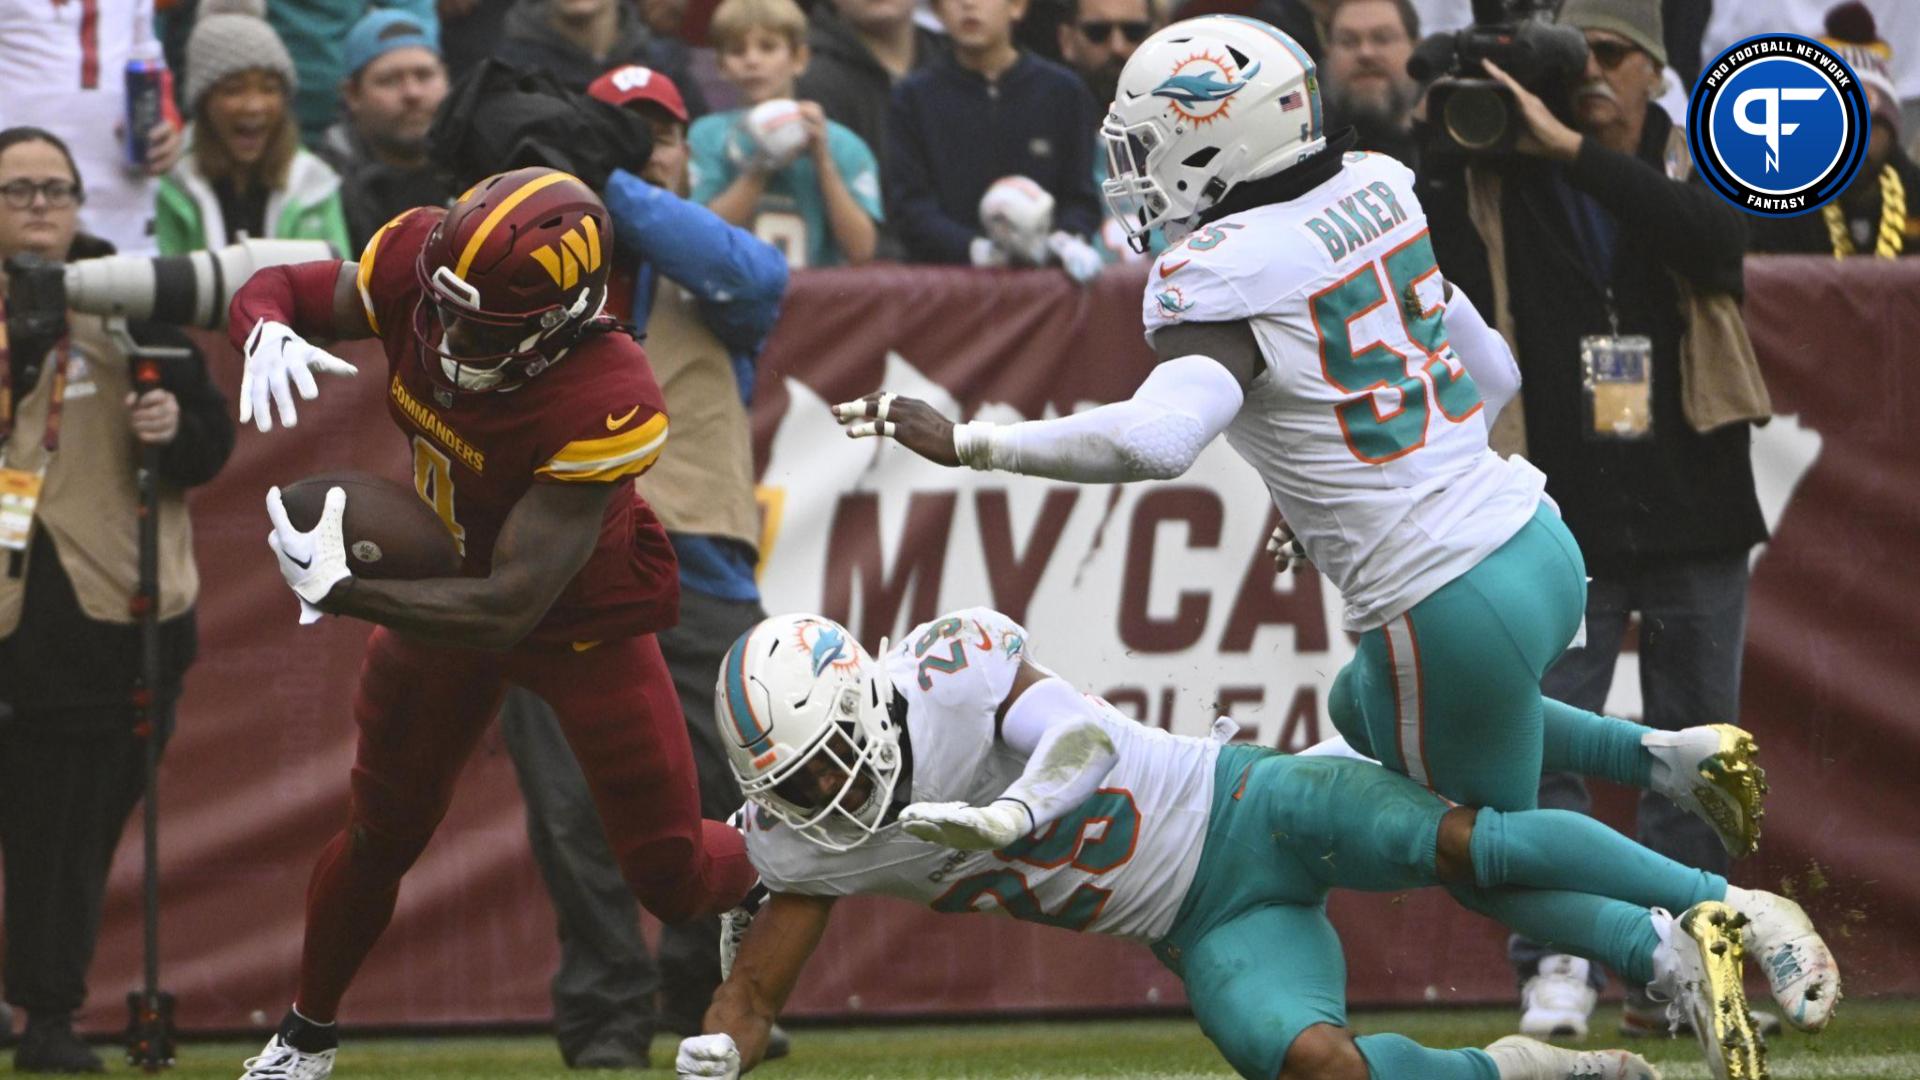 Washington Commanders wide receiver Curtis Samuel (4) reaches for the endzon against the Miami Dolphins during the first half at FedExField.